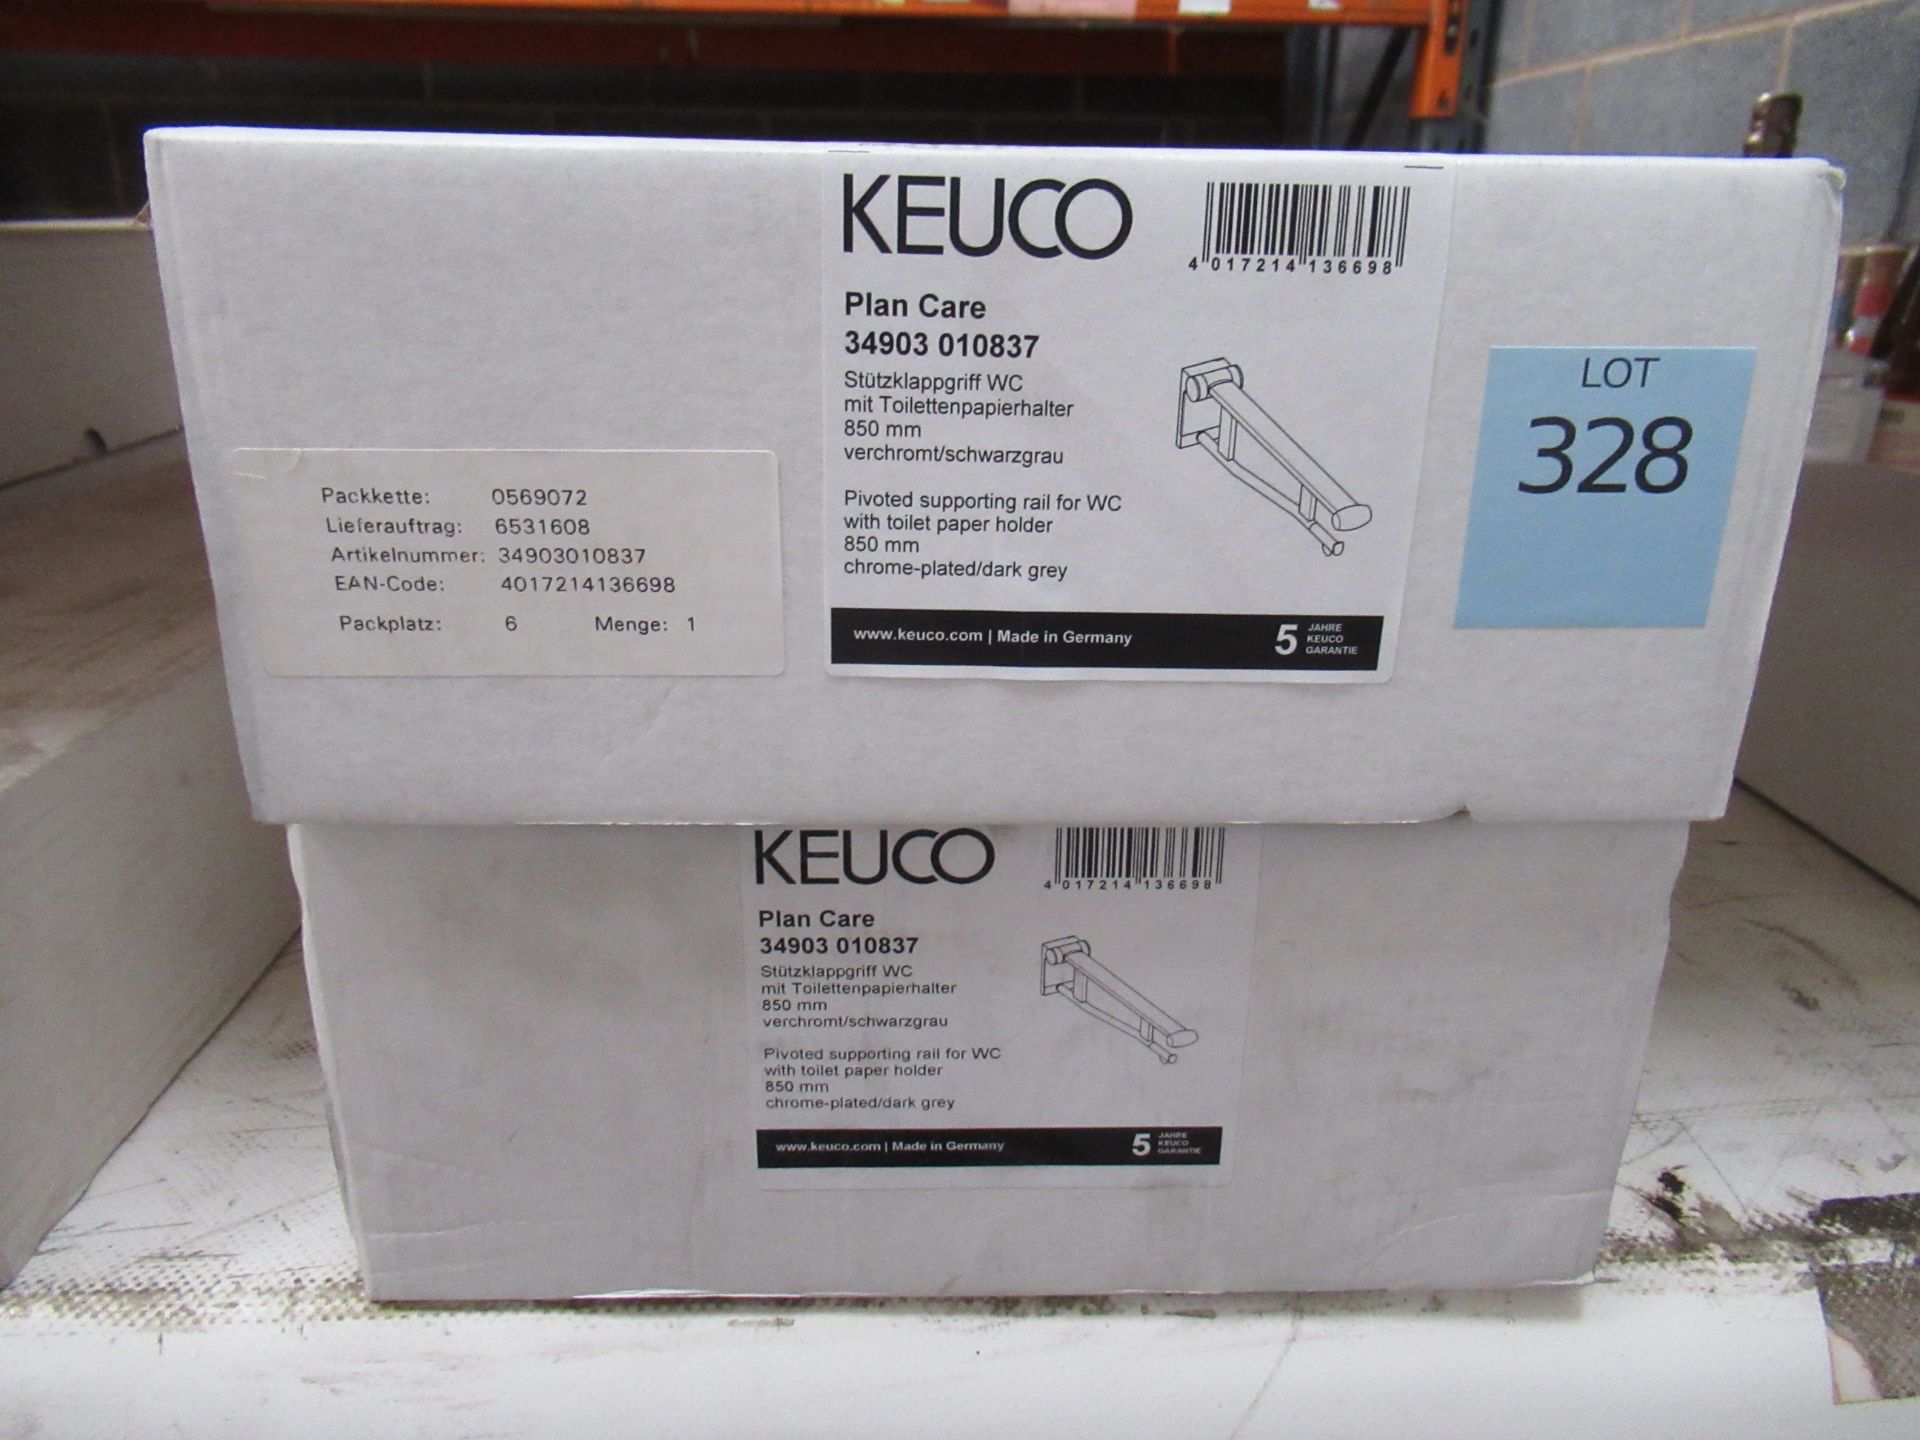 2 x Keuco Plan Care Pivoted Support Rail for W.C Chrome Plated/Dark Grey, P/N 34903-010837